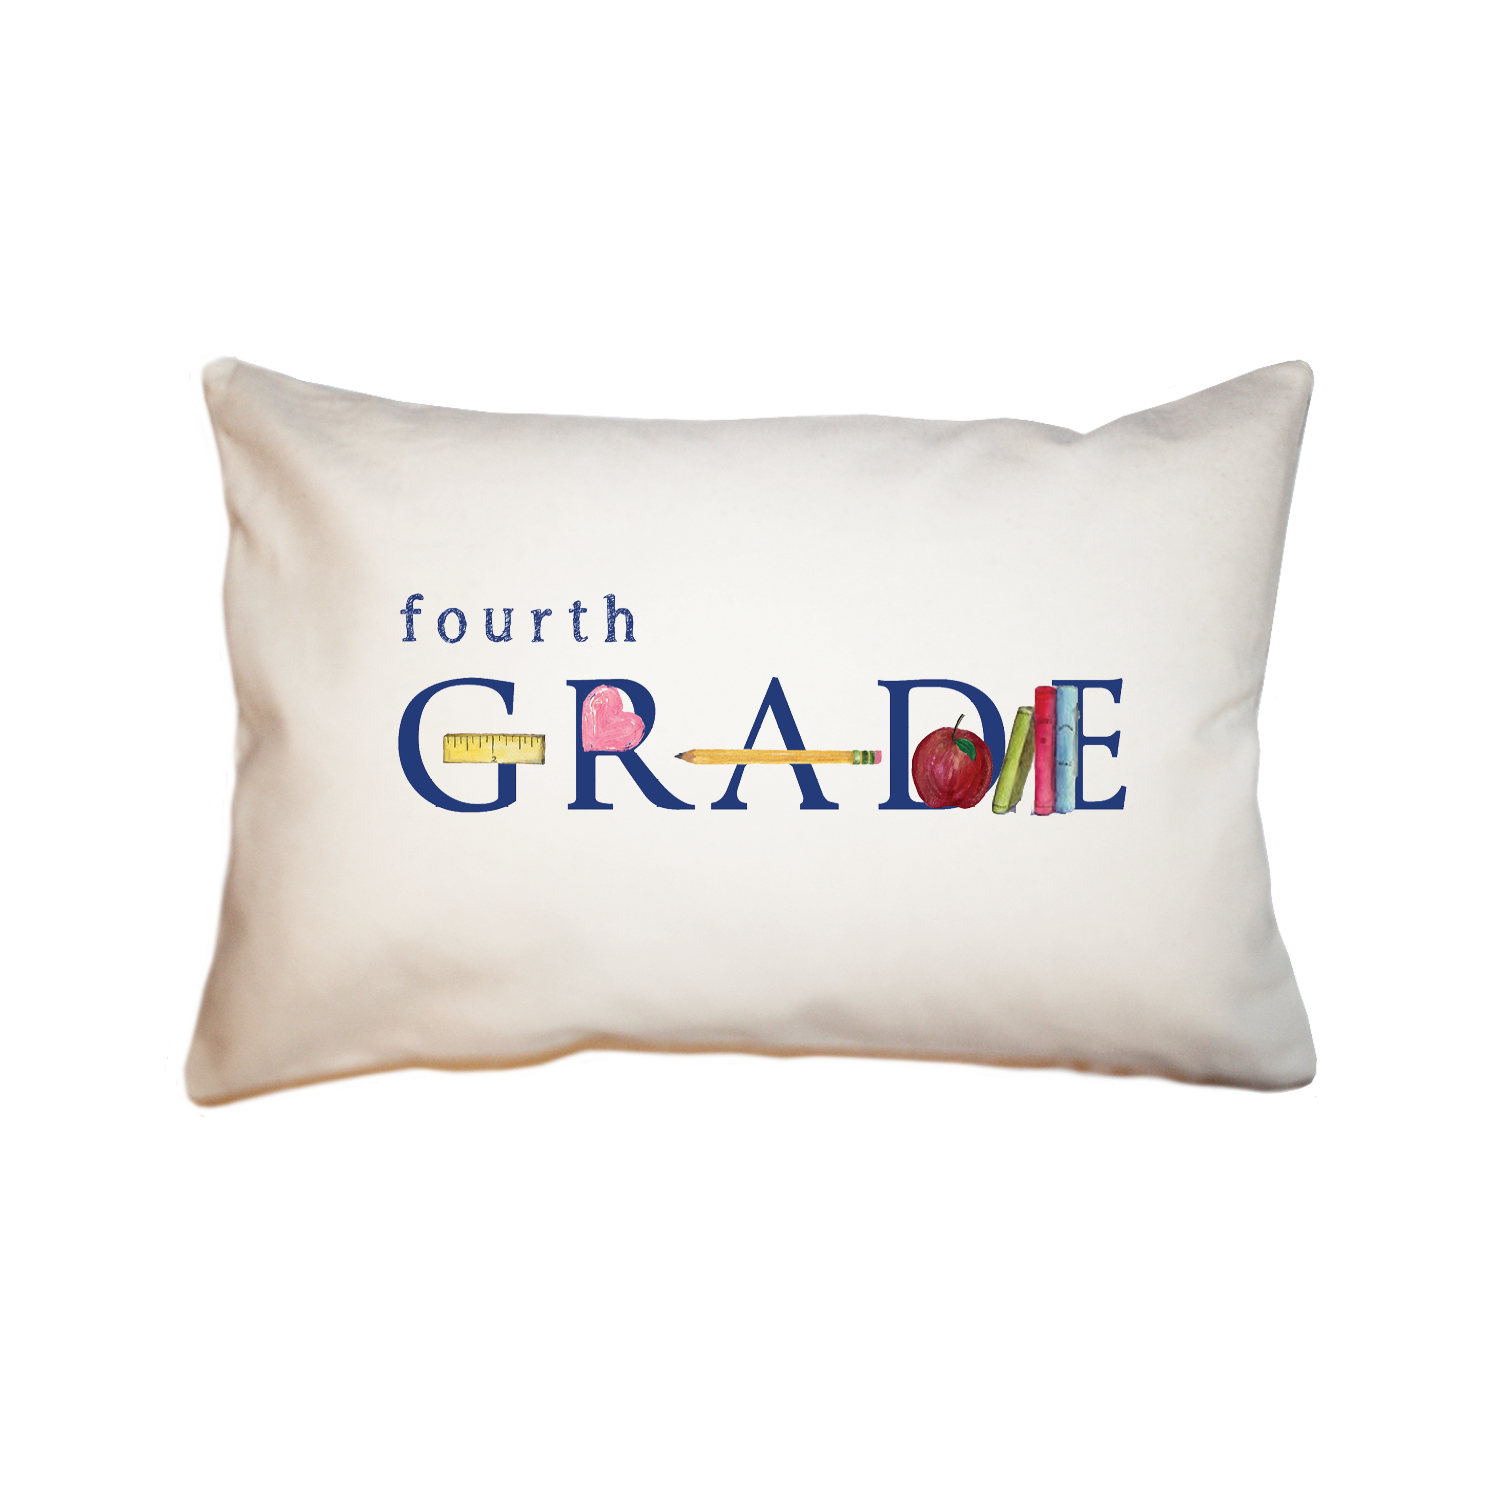 fourth grade large rectangle pillow